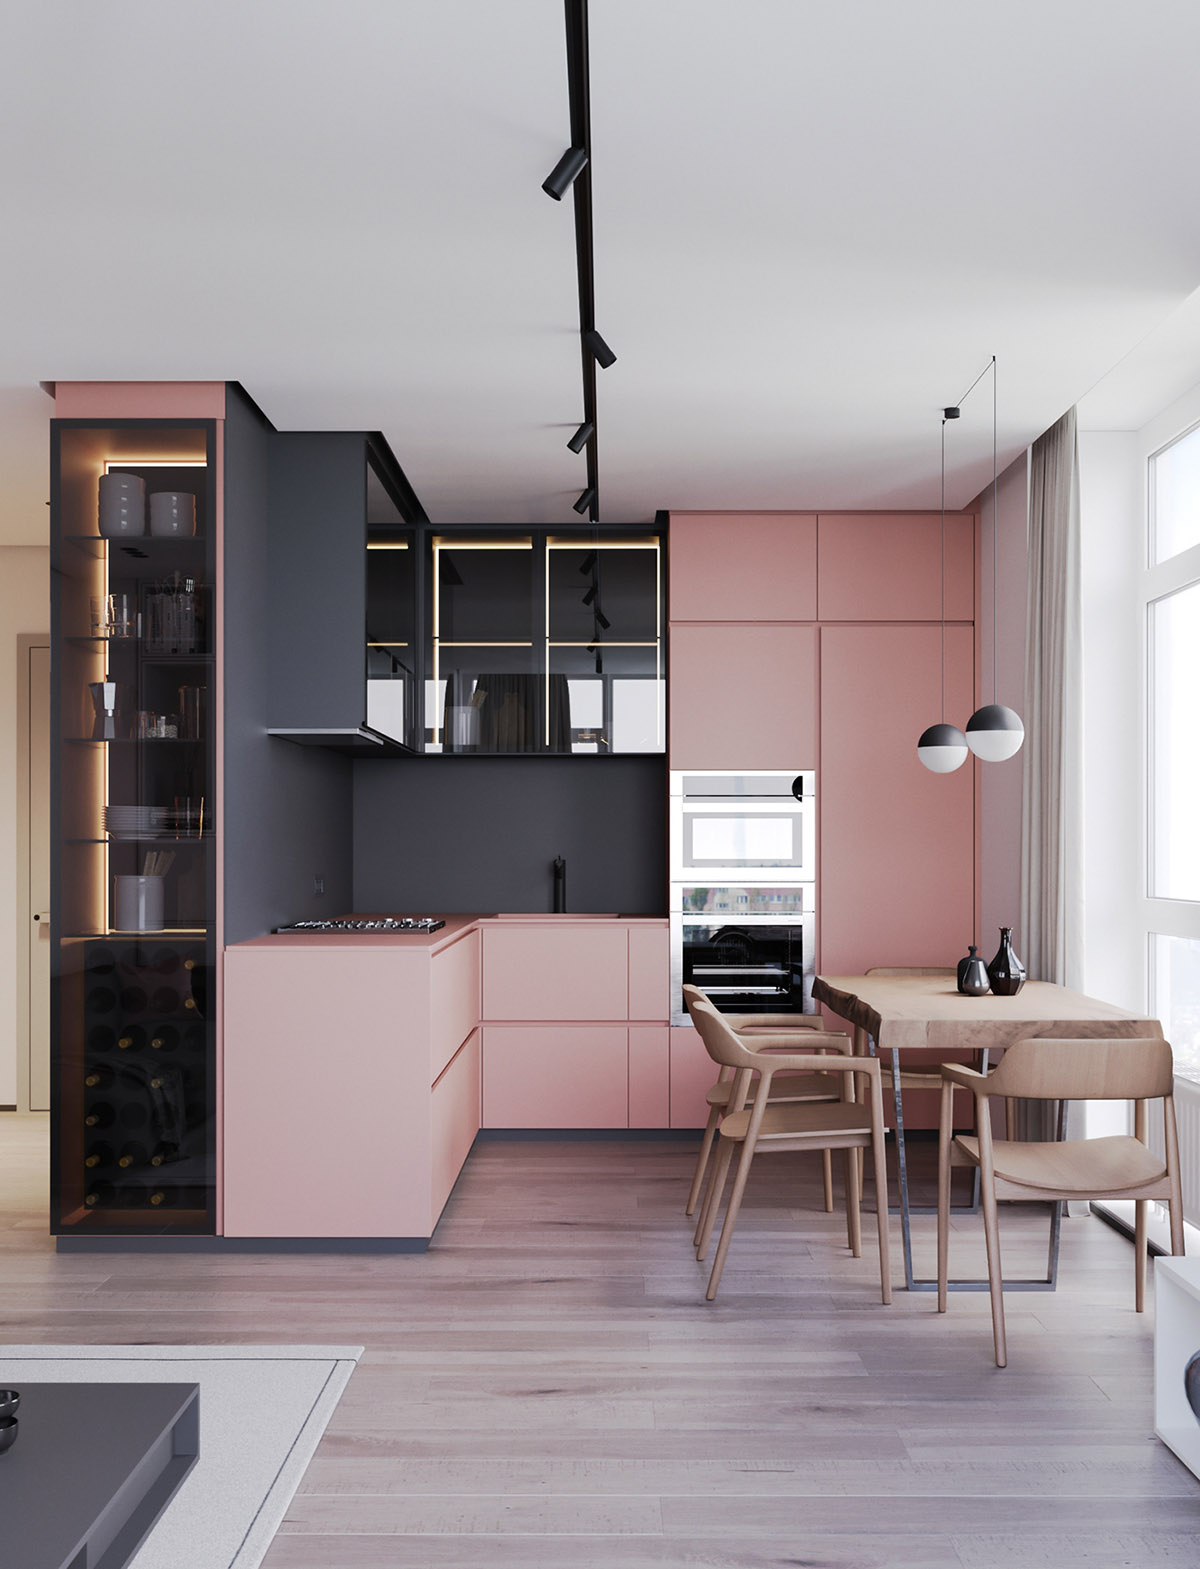 A Striking Example Of Interior Design Using Pink Grey